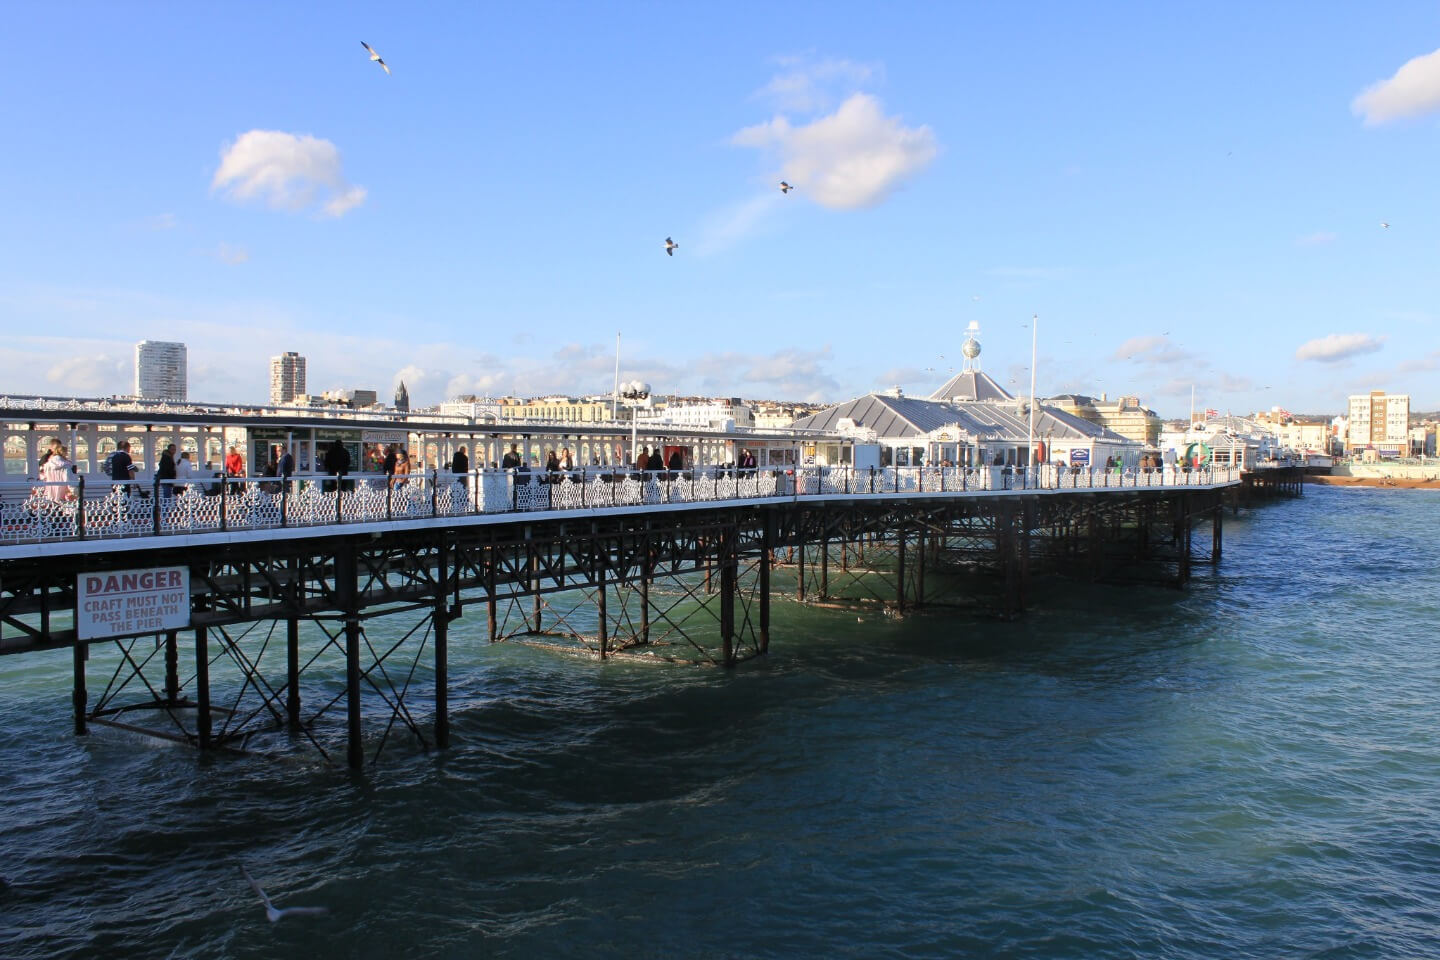 Student Accommodation in Kemptown, Brighton - Brighton Palace Pier on a sunny day